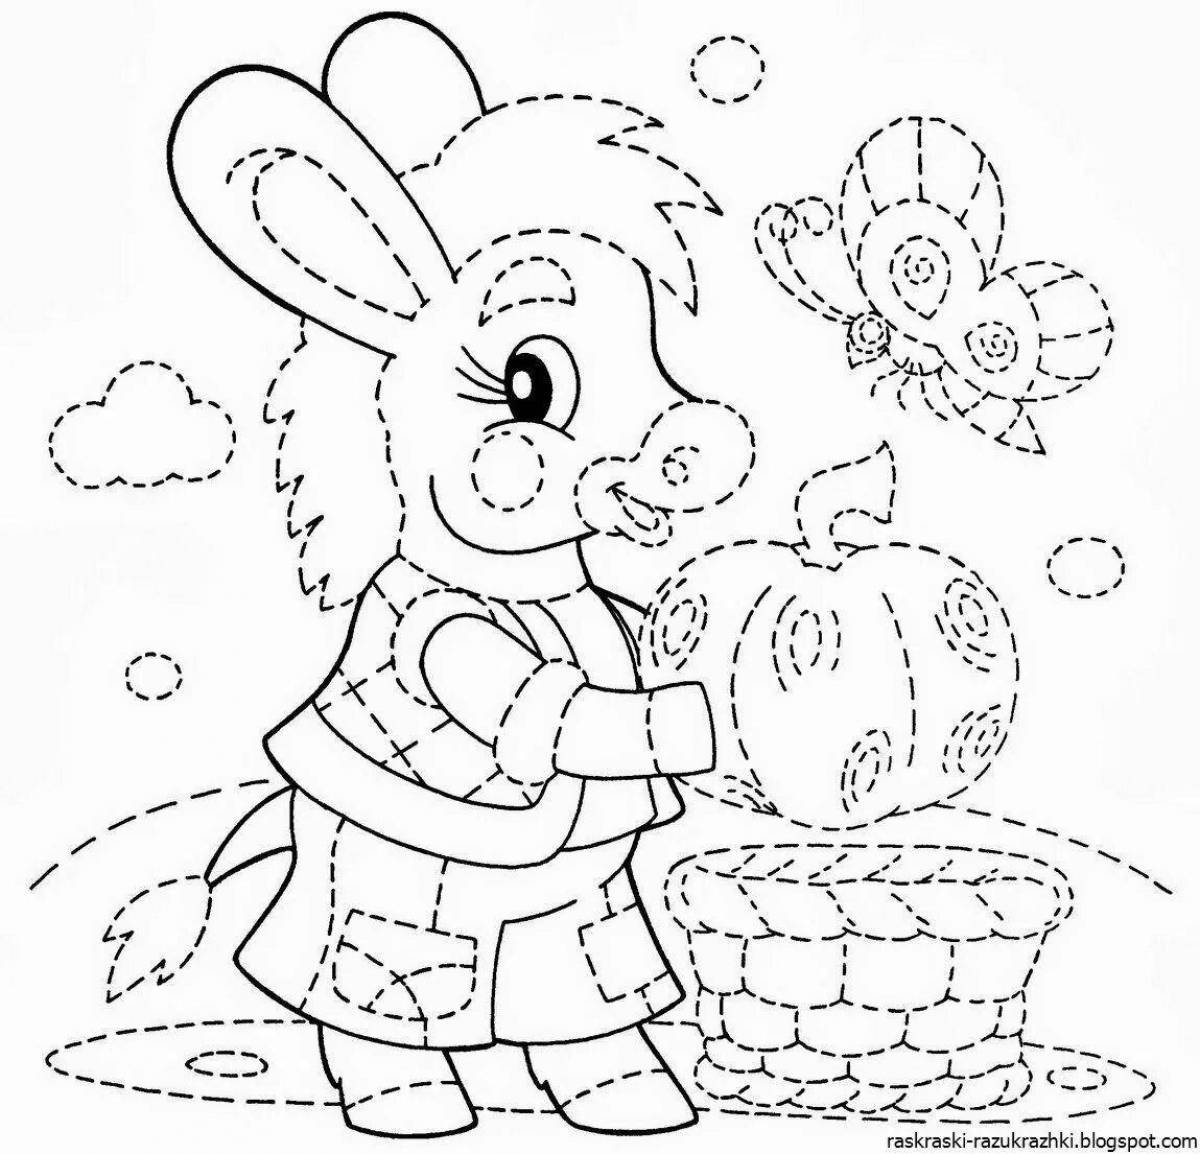 Fun coloring for children 5 years old